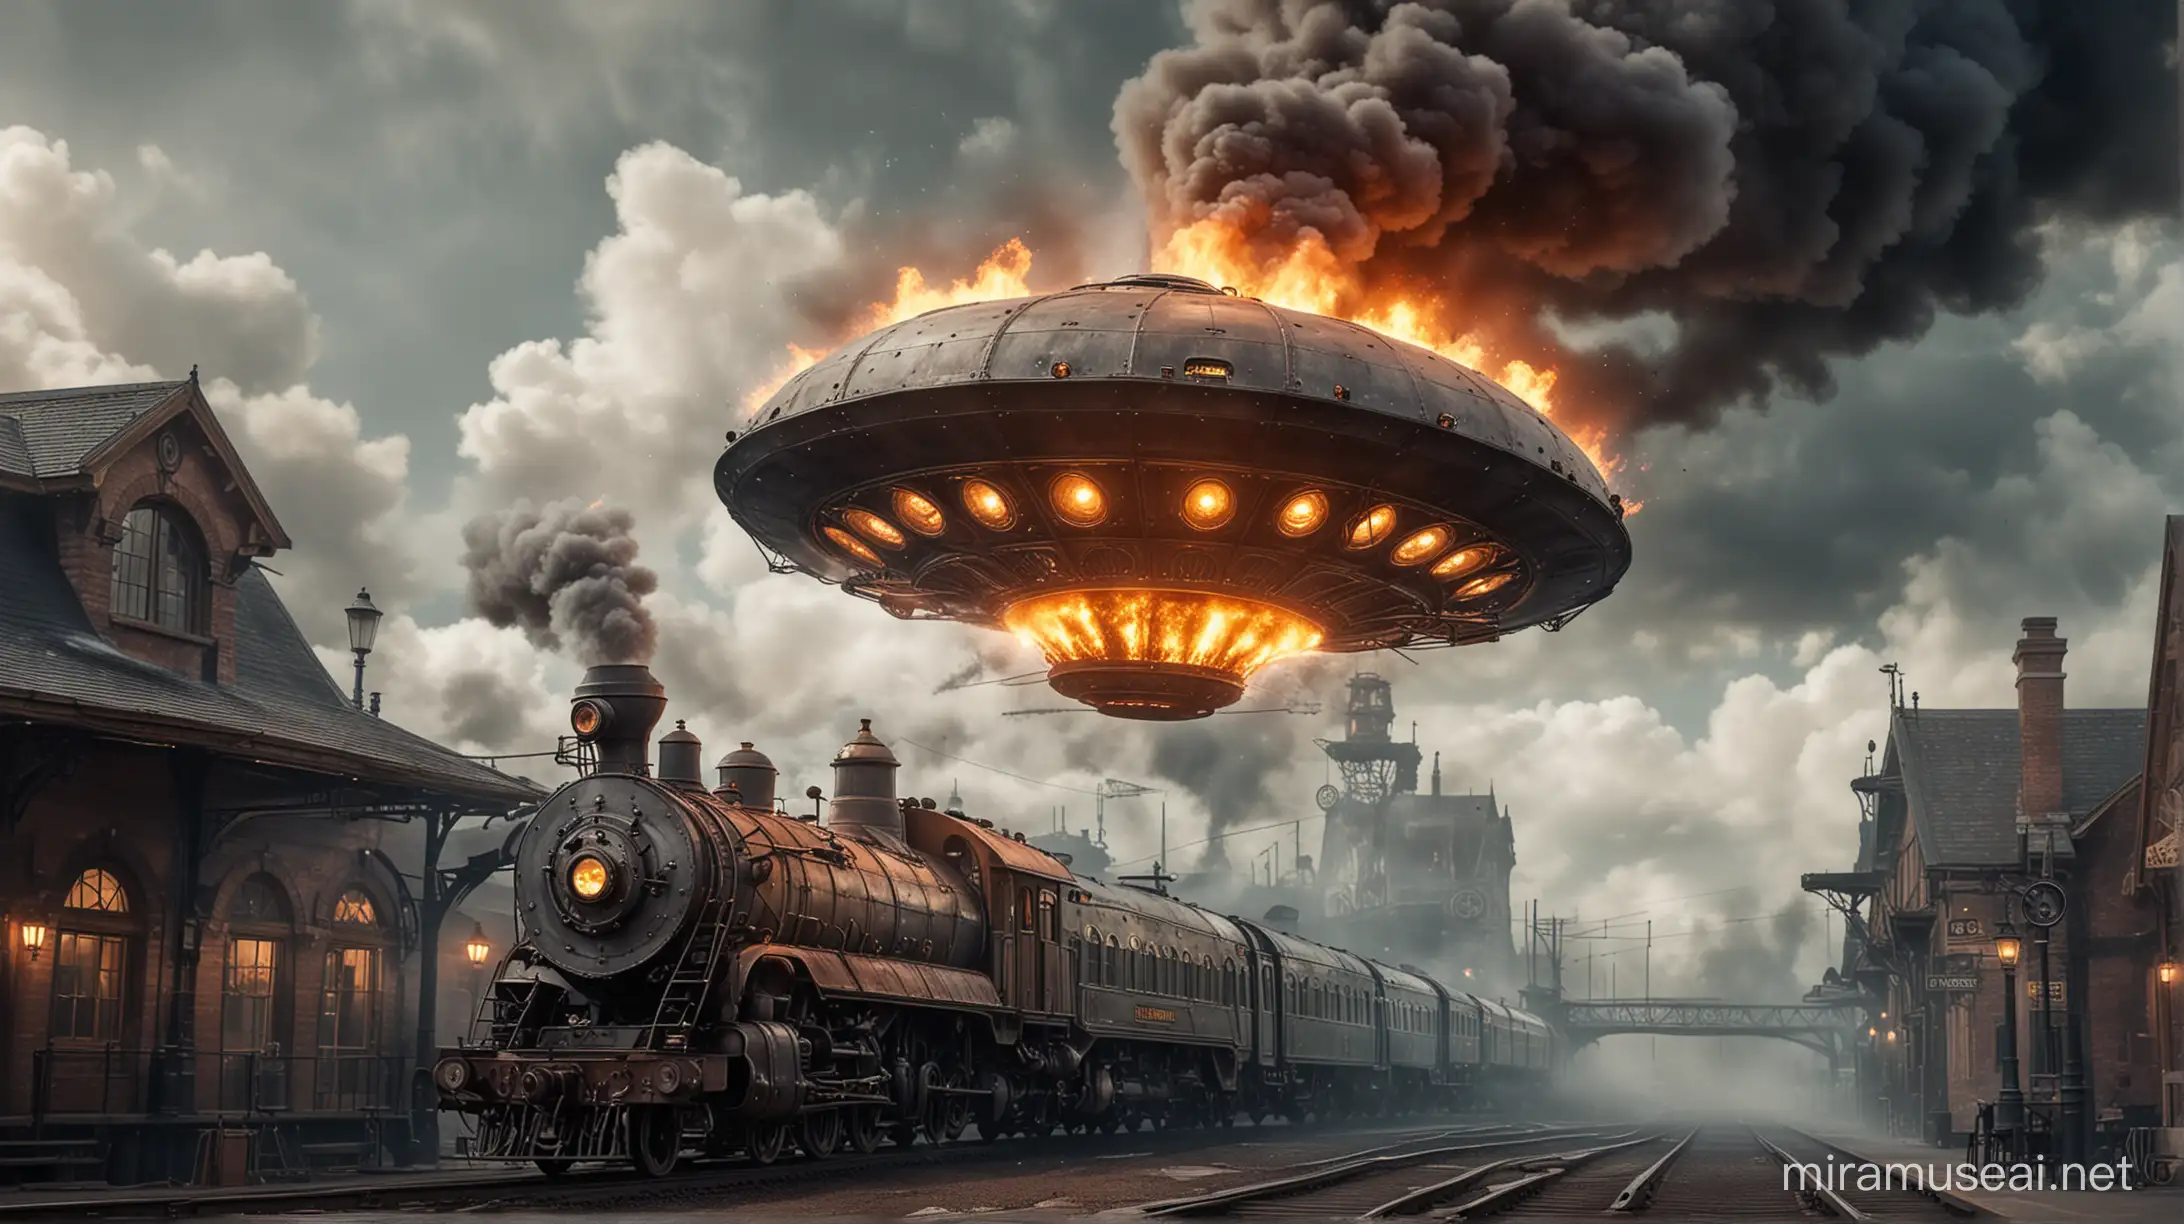 Steampunk Flying Saucer Engulfed in Smoke over Railway Station